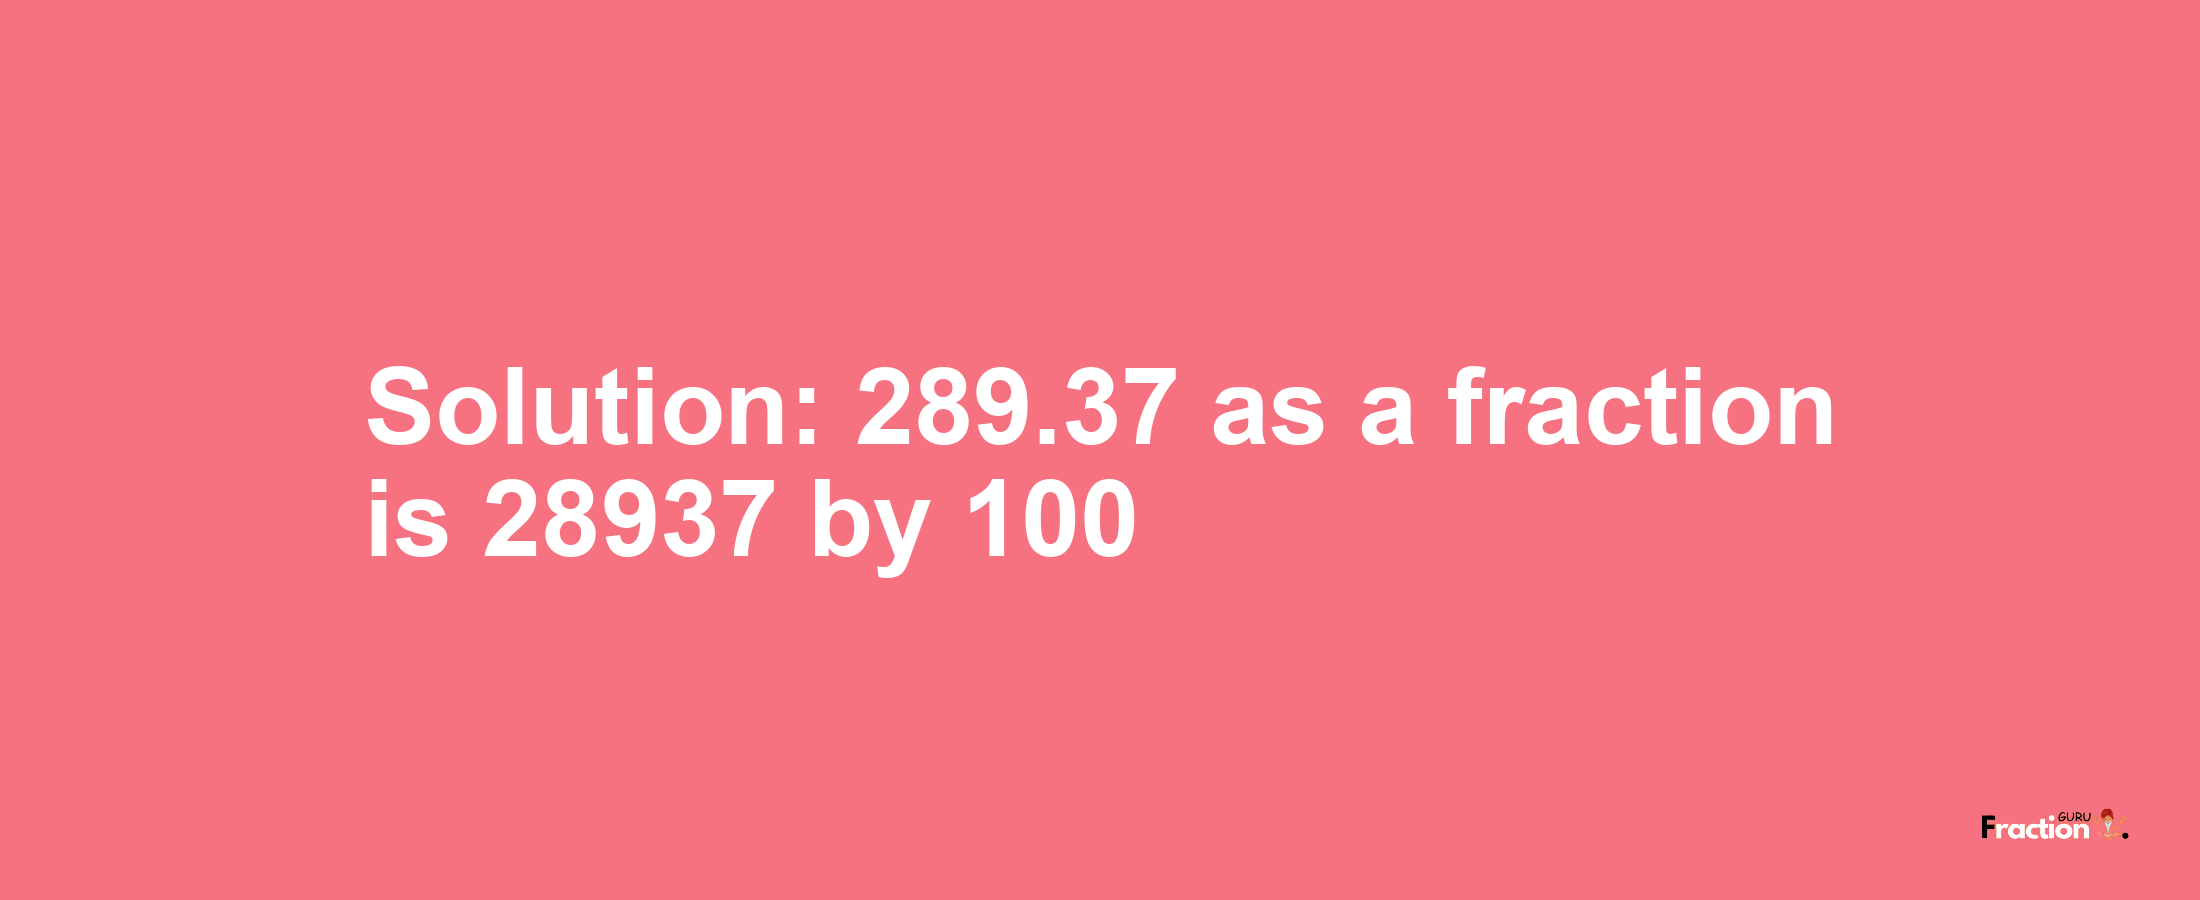 Solution:289.37 as a fraction is 28937/100